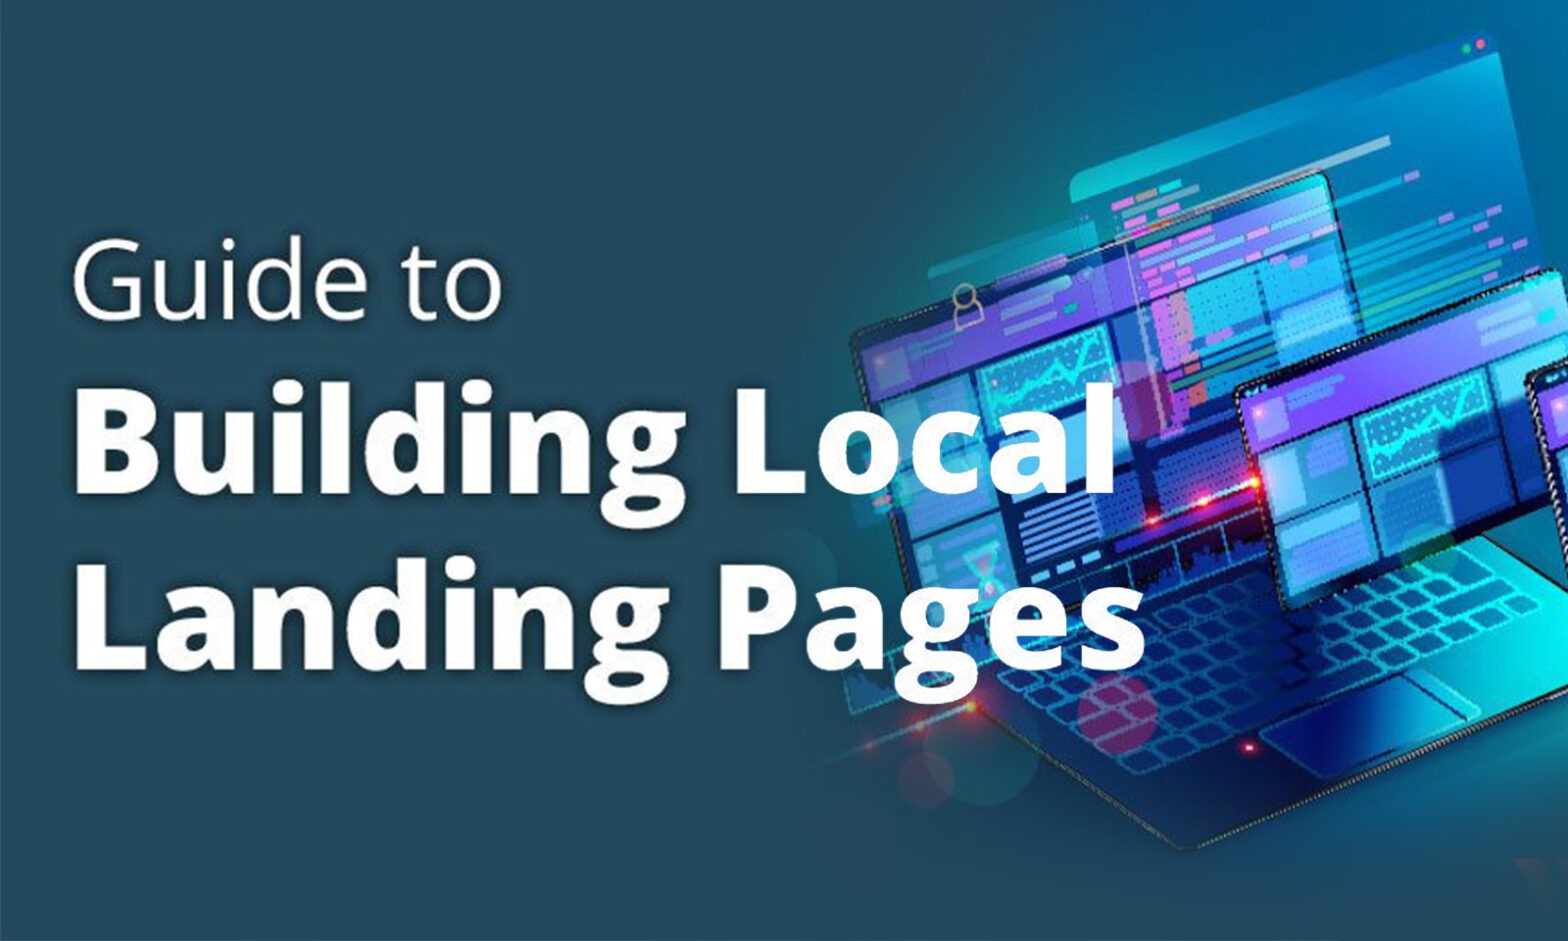 Guide to Building Local Landing Pages